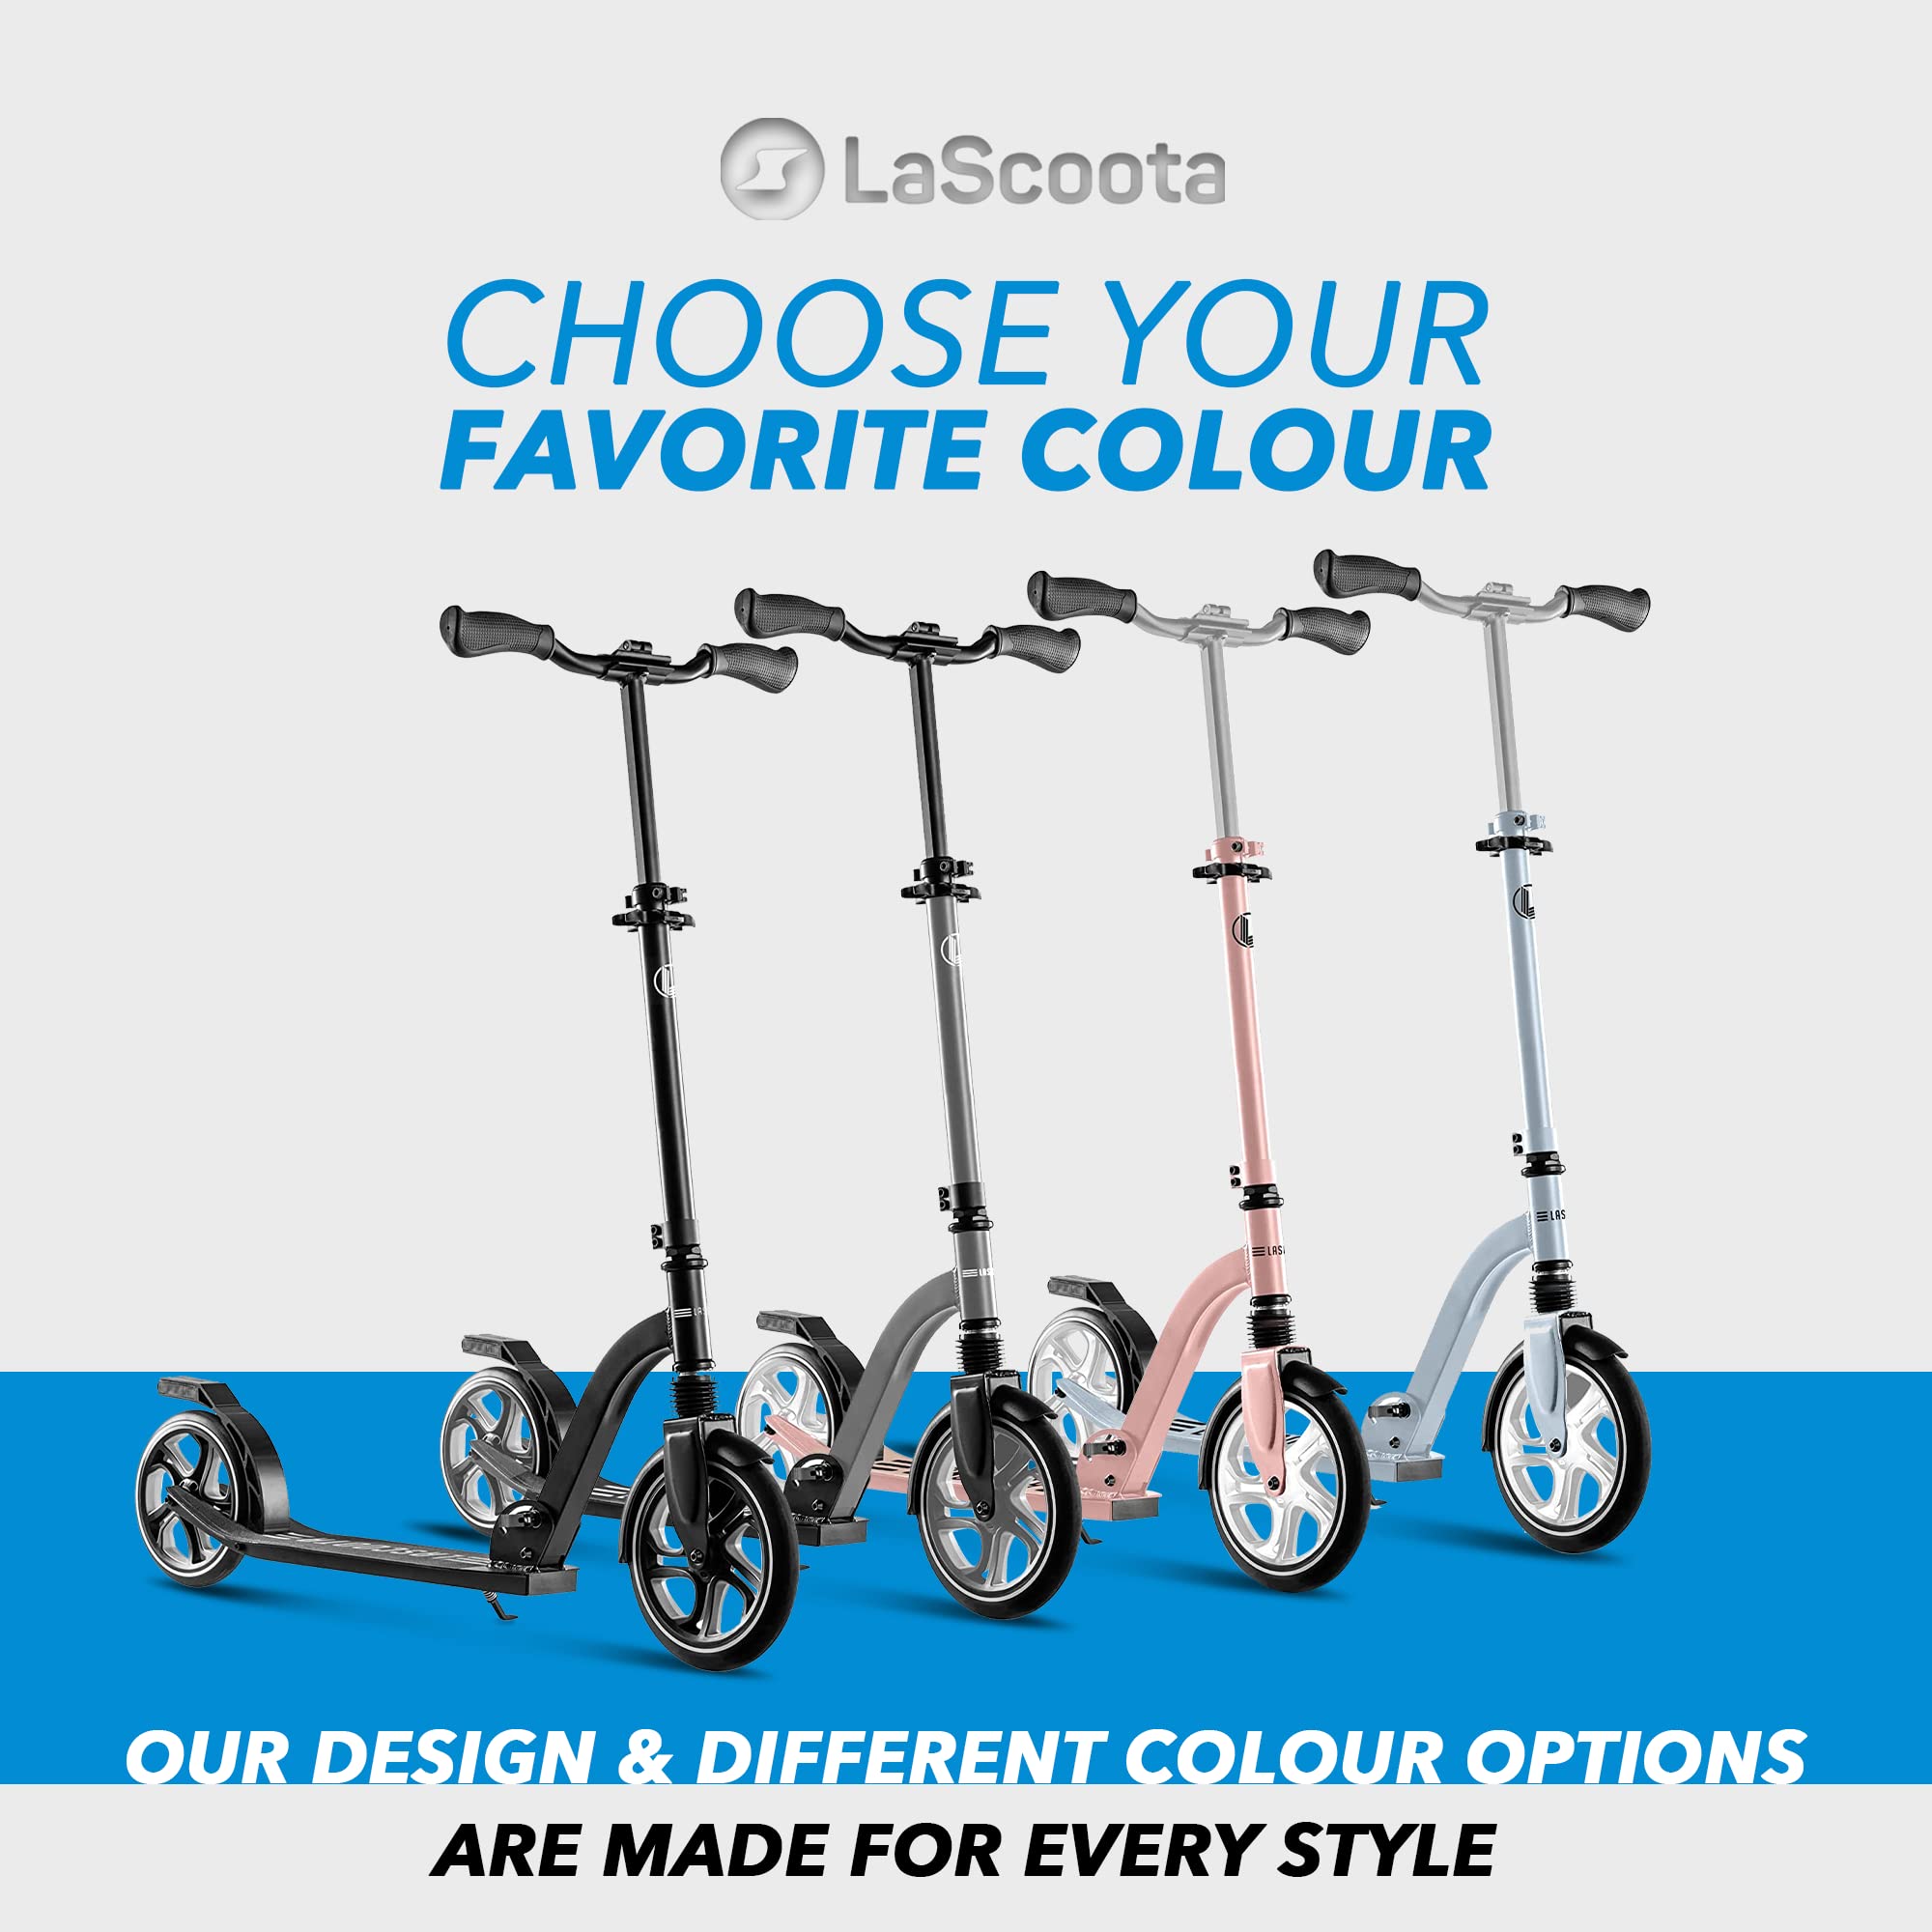 LaScoota Professional Scooter for Ages 6+, Teens & Adults - Lightweight & Big Sturdy Wheels for Kids, Teen & Adults. Adjustable Handlebar, Foldable Kick Scooter for Indoor & Outdoor, Great Gift & Toy